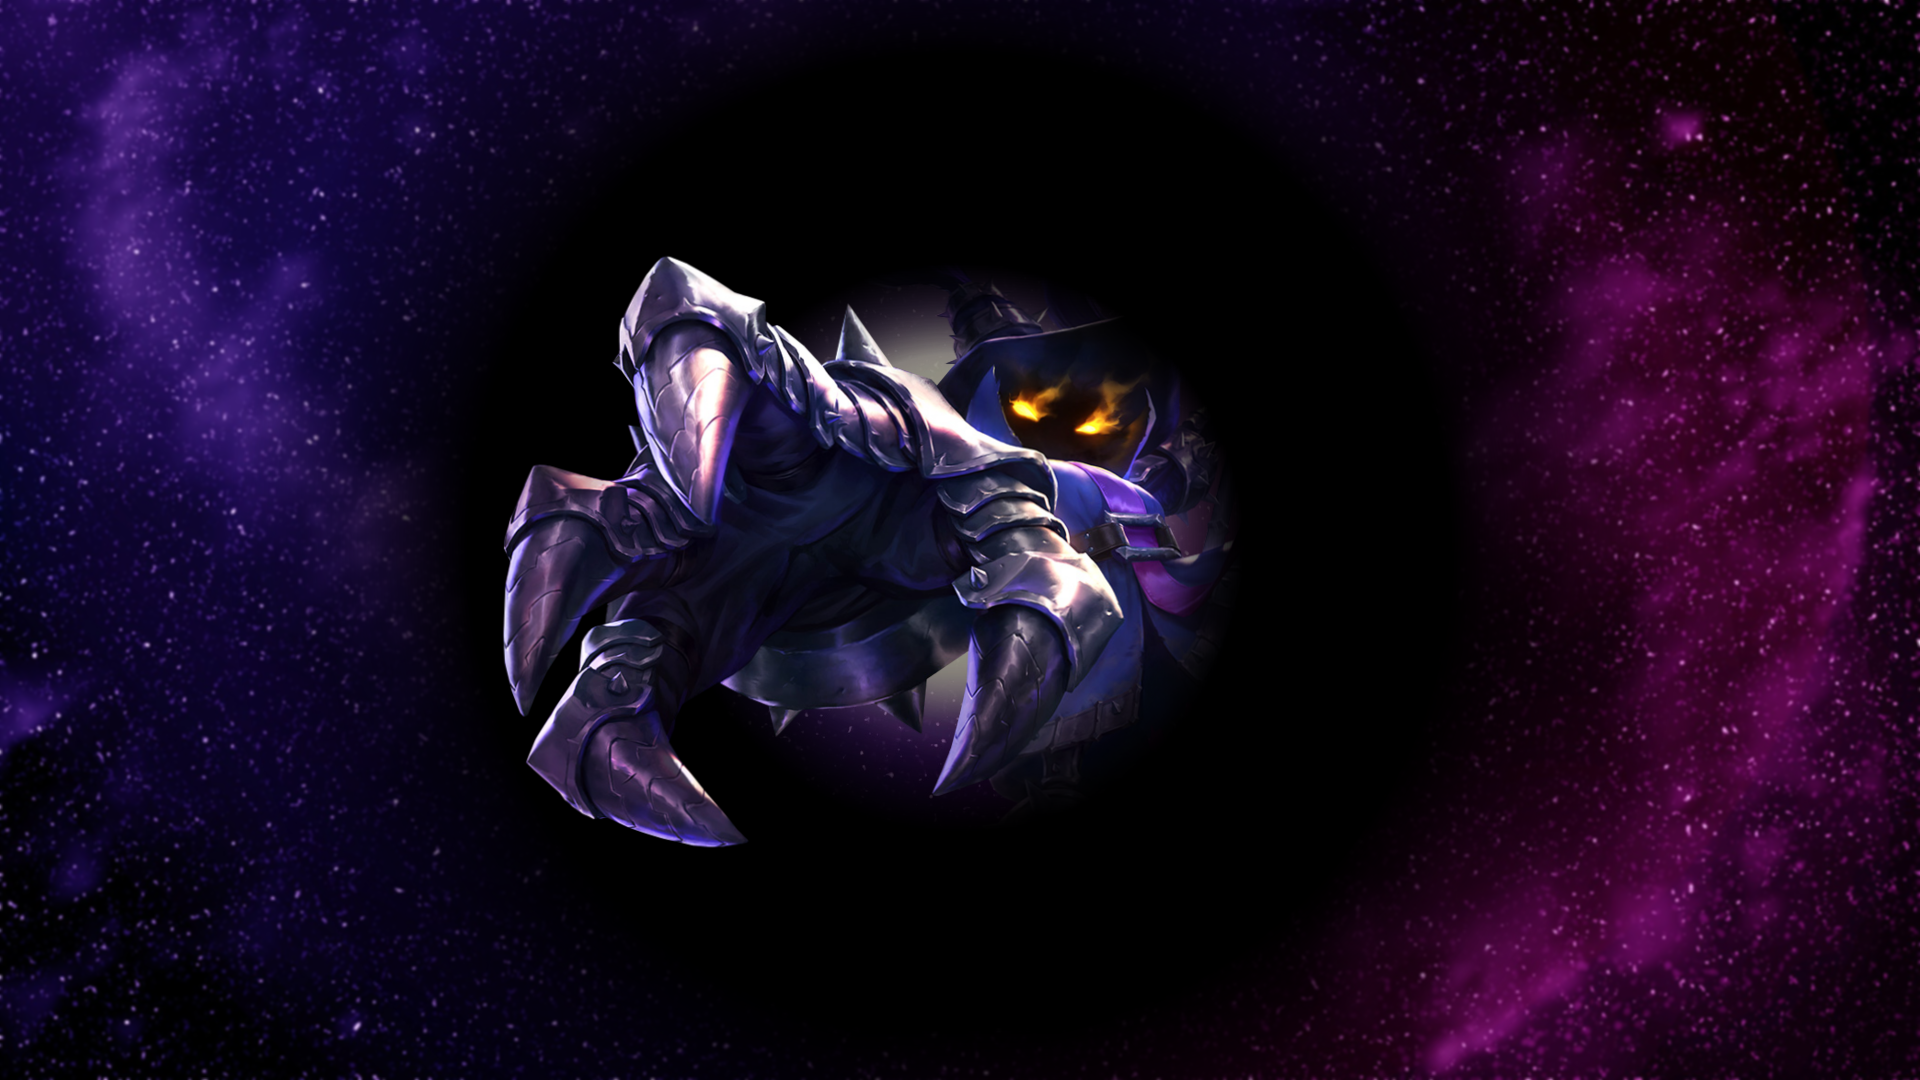 General 1920x1080 League of Legends picture-in-picture Veigar space black holes stars